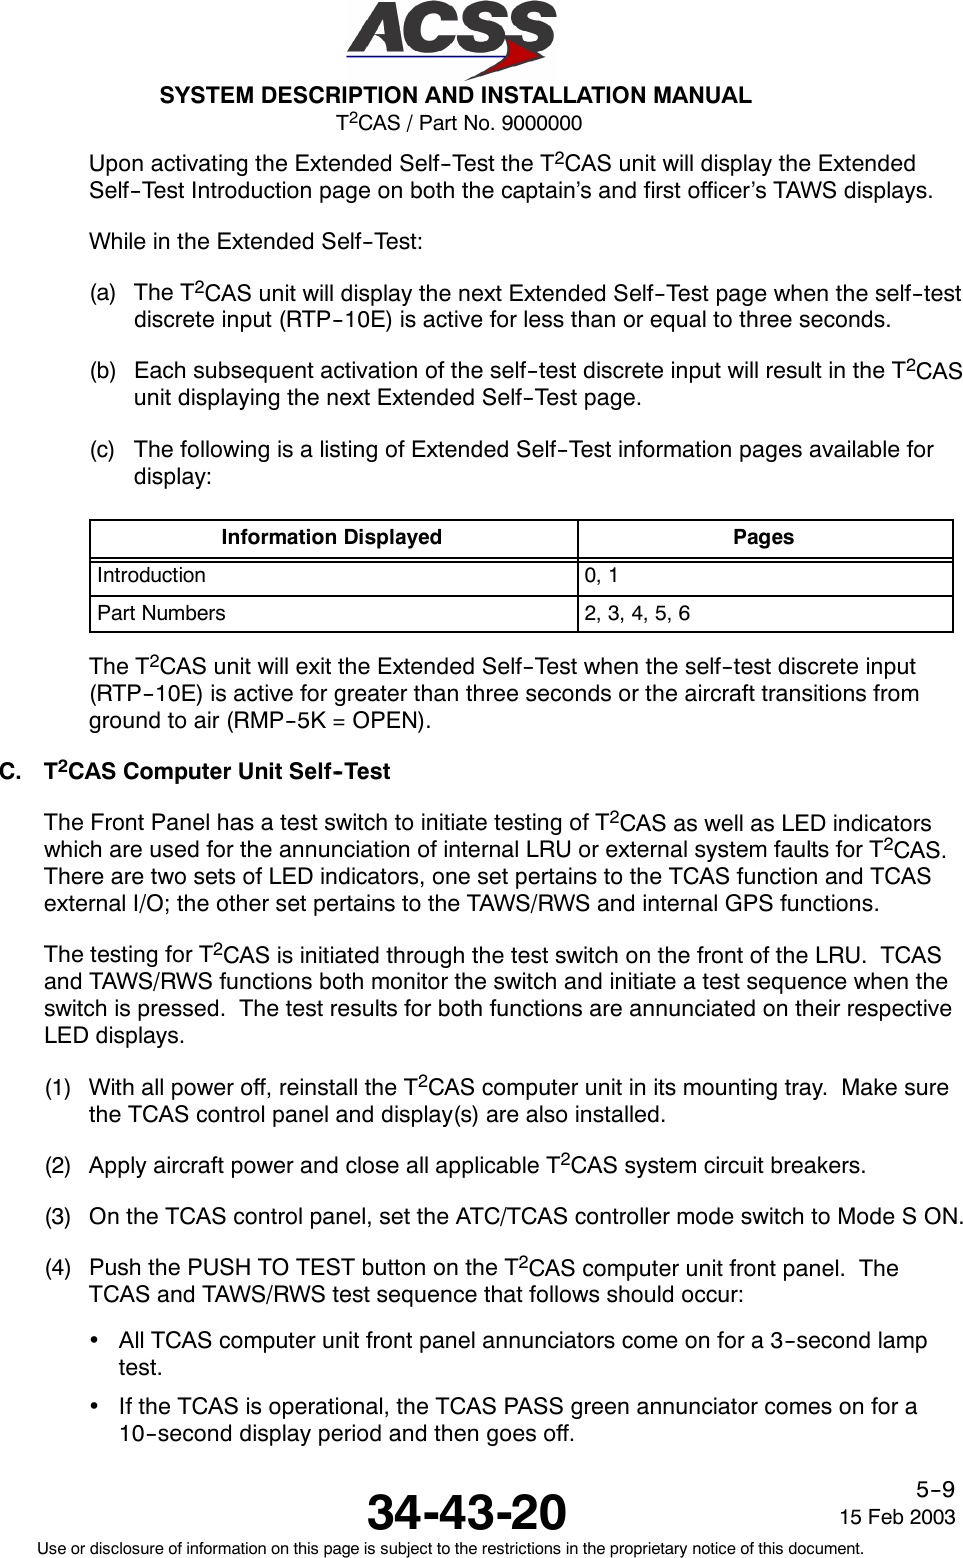 T2CAS / Part No. 9000000SYSTEM DESCRIPTION AND INSTALLATION MANUAL34-43-20 15 Feb 2003Use or disclosure of information on this page is subject to the restrictions in the proprietary notice of this document.5--9Upon activating the Extended Self--Test the T2CAS unit will display the ExtendedSelf--Test Introduction page on both the captain’s and first officer’s TAWS displays.While in the Extended Self--Test:(a) The T2CAS unit will display the next Extended Self--Test page when the self--testdiscrete input (RTP--10E) is active for less than or equal to three seconds.(b) Each subsequent activation of the self--test discrete input will result in the T2CASunit displaying the next Extended Self--Test page.(c) The following is a listing of Extended Self--Test information pages available fordisplay:Information Displayed PagesIntroduction 0, 1Part Numbers 2, 3, 4, 5, 6The T2CAS unit will exit the Extended Self--Test when the self--test discrete input(RTP--10E) is active for greater than three seconds or the aircraft transitions fromground to air (RMP--5K = OPEN).C. T2CAS Computer Unit Self--TestThe Front Panel has a test switch to initiate testing of T2CAS as well as LED indicatorswhich are used for the annunciation of internal LRU or external system faults for T2CAS.There are two sets of LED indicators, one set pertains to the TCAS function and TCASexternal I/O; the other set pertains to the TAWS/RWS and internal GPS functions.The testing for T2CAS is initiated through the test switch on the front of the LRU. TCASand TAWS/RWS functions both monitor the switch and initiate a test sequence when theswitch is pressed. The test results for both functions are annunciated on their respectiveLED displays.(1) With all power off, reinstall the T2CAS computer unit in its mounting tray. Make surethe TCAS control panel and display(s) are also installed.(2) Apply aircraft power and close all applicable T2CAS system circuit breakers.(3) On the TCAS control panel, set the ATC/TCAS controller mode switch to Mode S ON.(4) Push the PUSH TO TEST button on the T2CAS computer unit front panel. TheTCAS and TAWS/RWS test sequence that follows should occur:•All TCAS computer unit front panel annunciators come on for a 3--second lamptest.•If the TCAS is operational, the TCAS PASS green annunciator comes on for a10--second display period and then goes off.